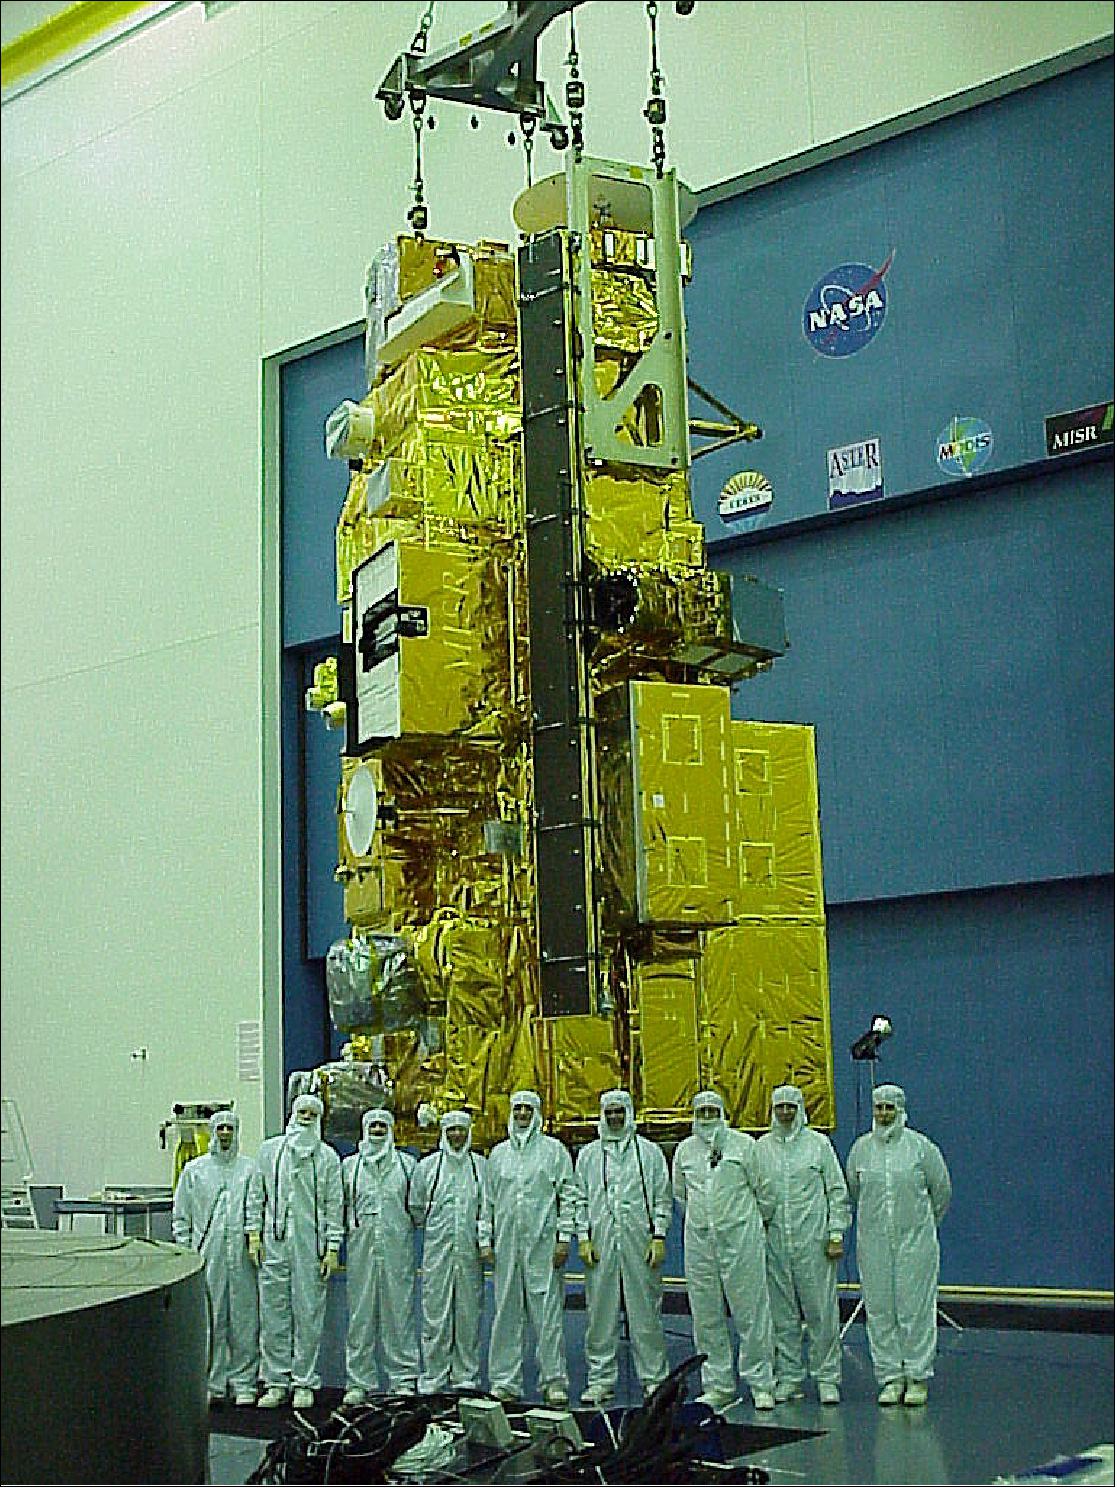 Figure 8: Terra’s test team stands in front of the satellite during its construction and testing phase (image credit: NASA, Dick Quinn)